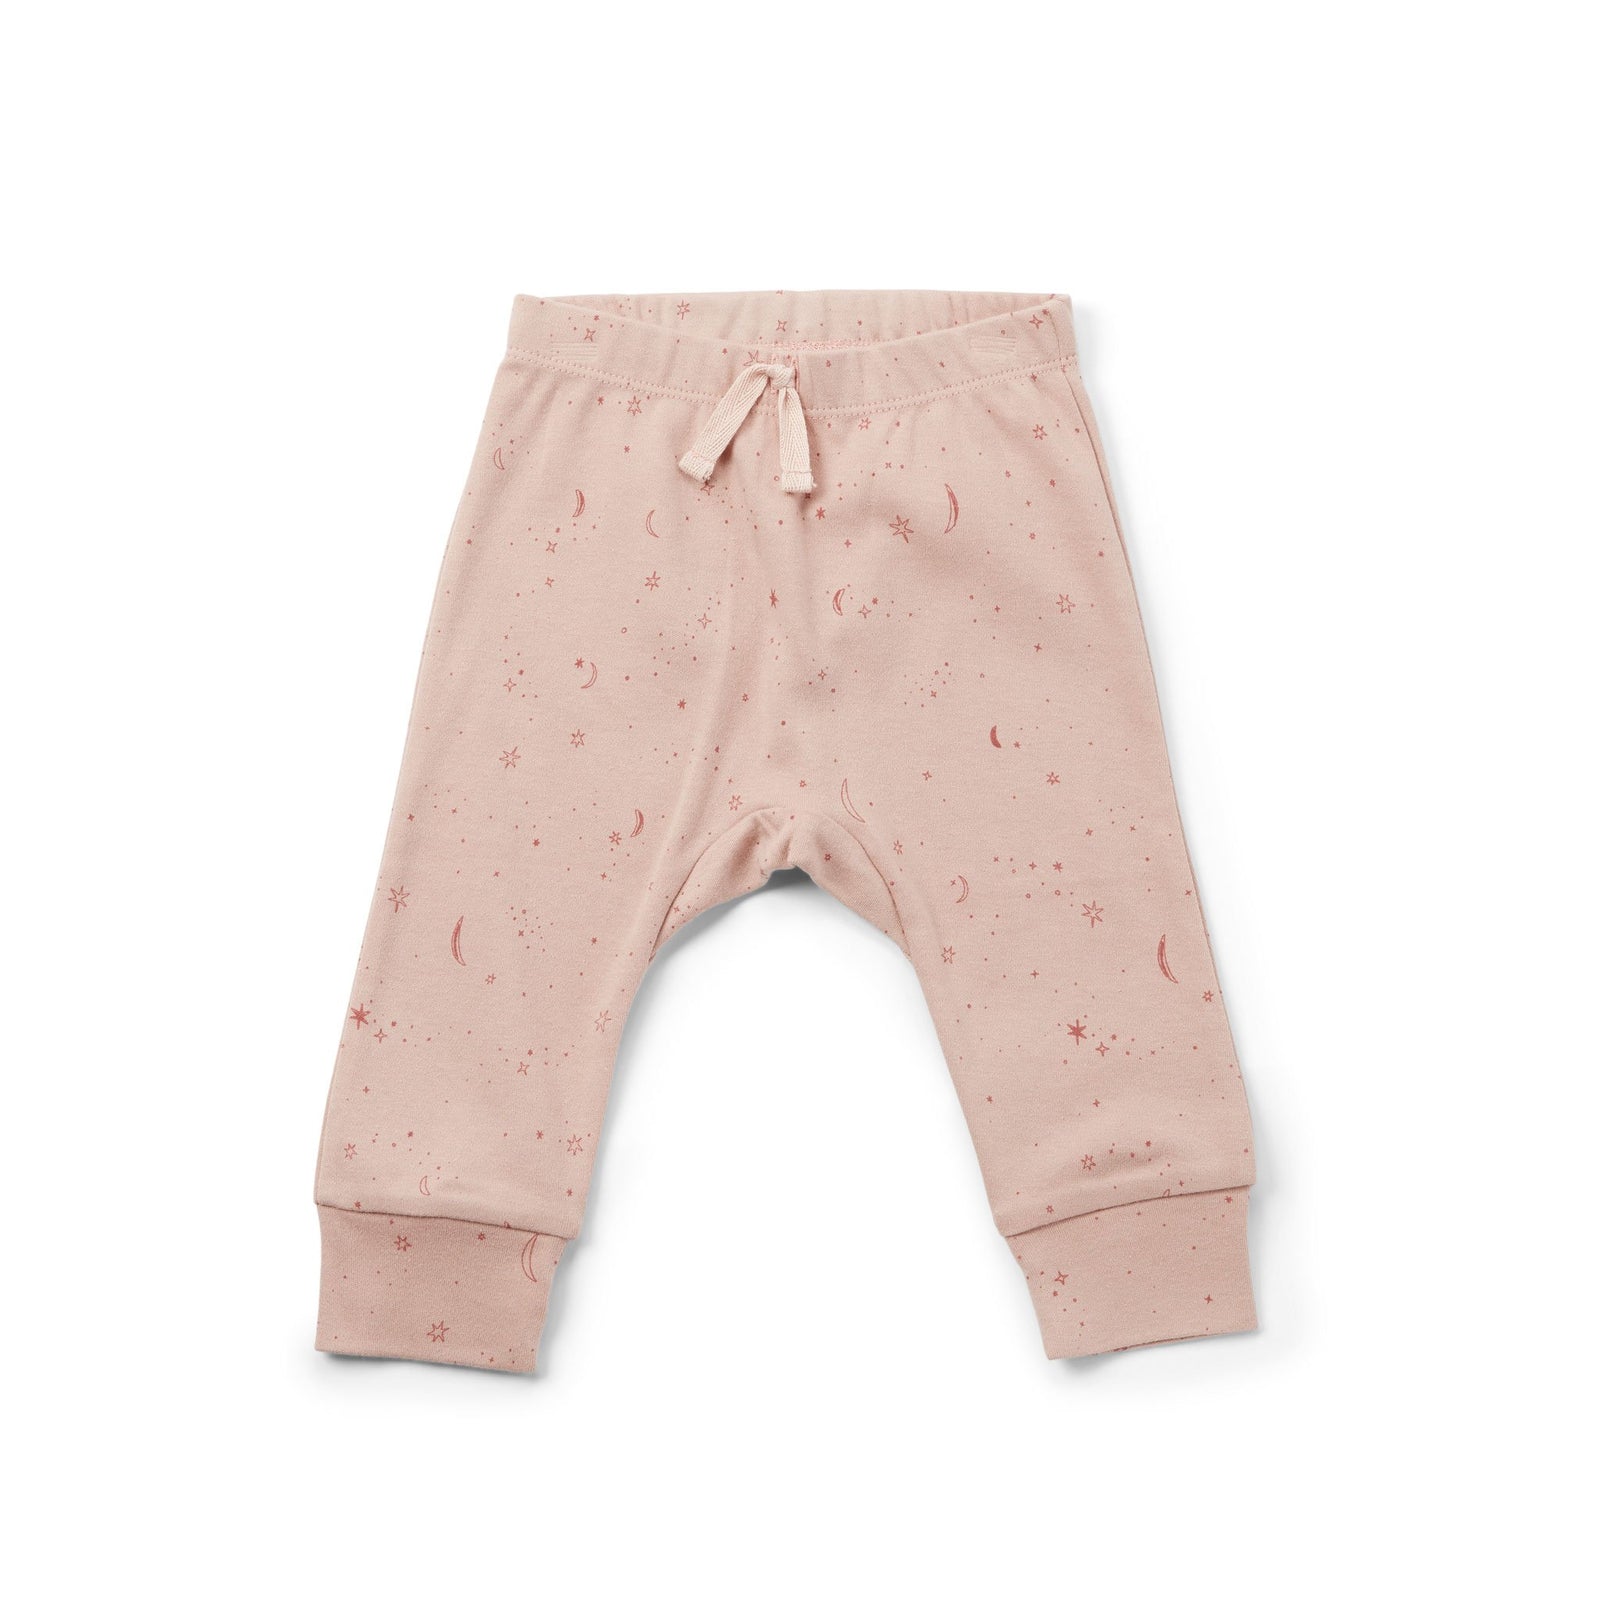 Pehr Stardust Organic Harem Pant. GOTS Certified Organic Cotton & Dyes. Pink with celestial pattern.